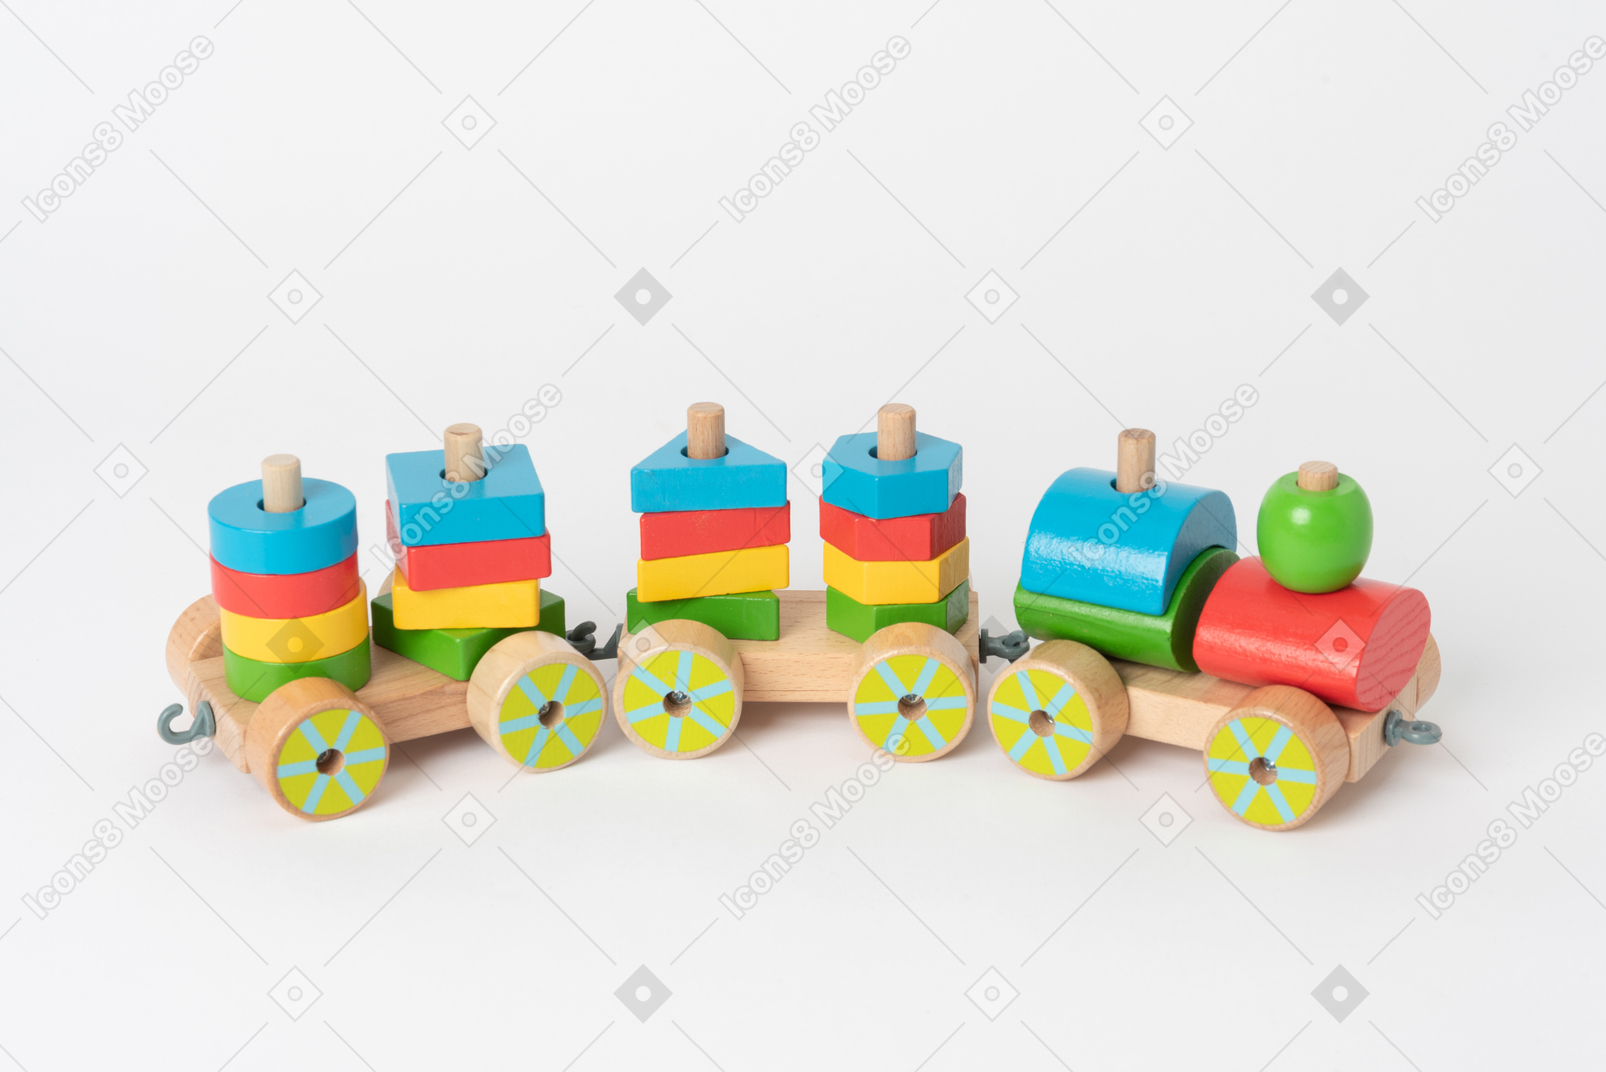 A colorful wooden toy train and geometrical shapes of many colors, lying against a plain white background